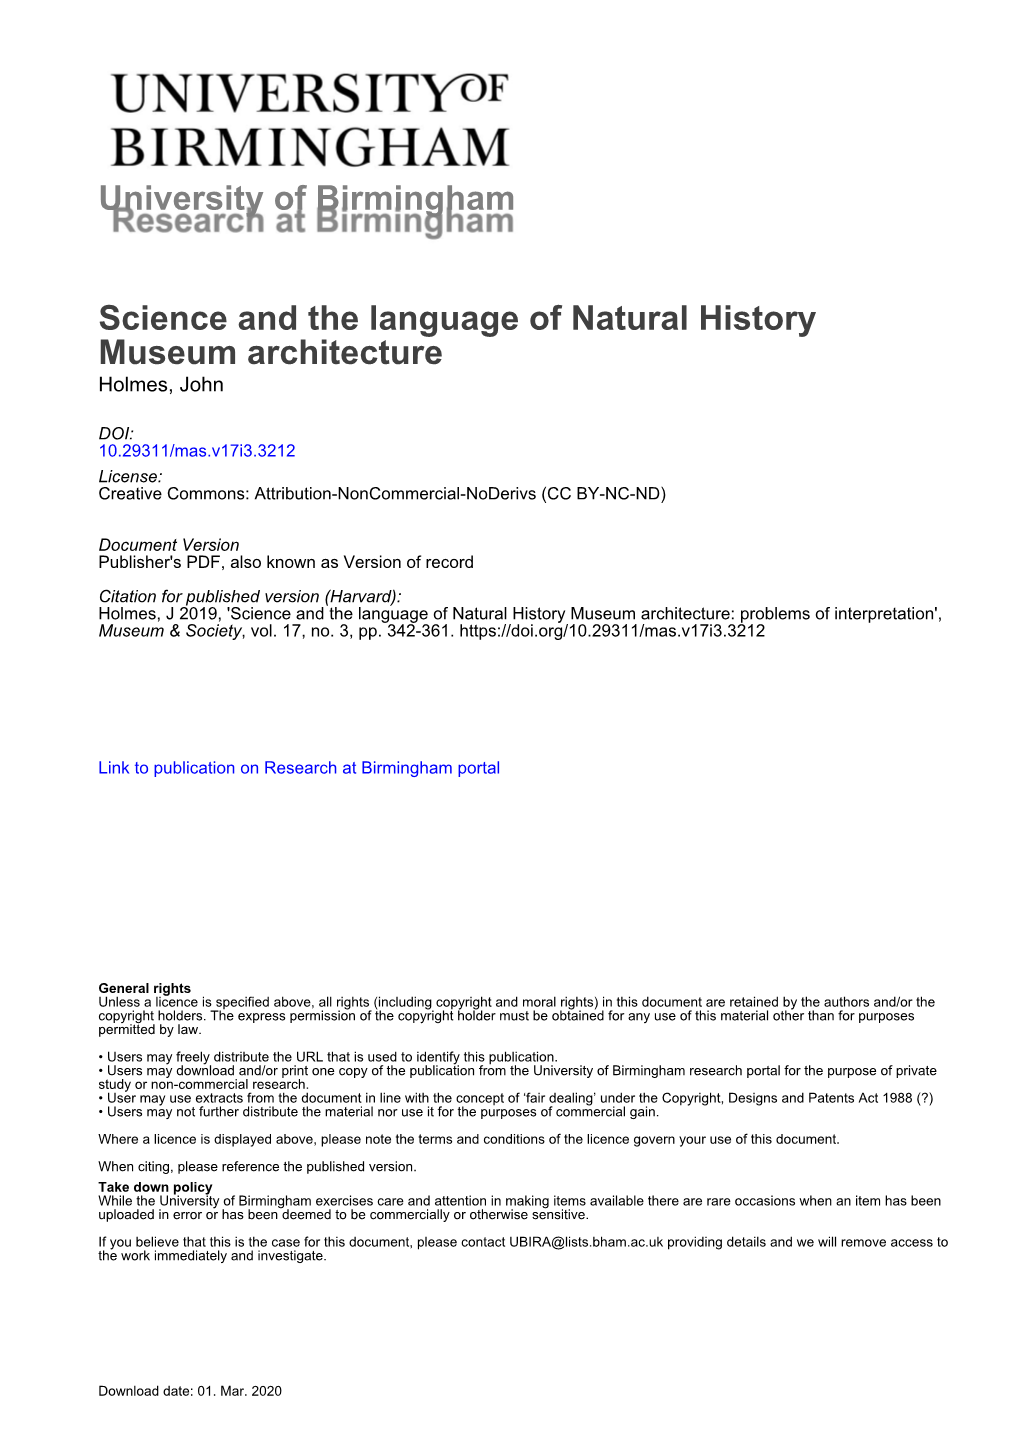 University of Birmingham Science and the Language of Natural History